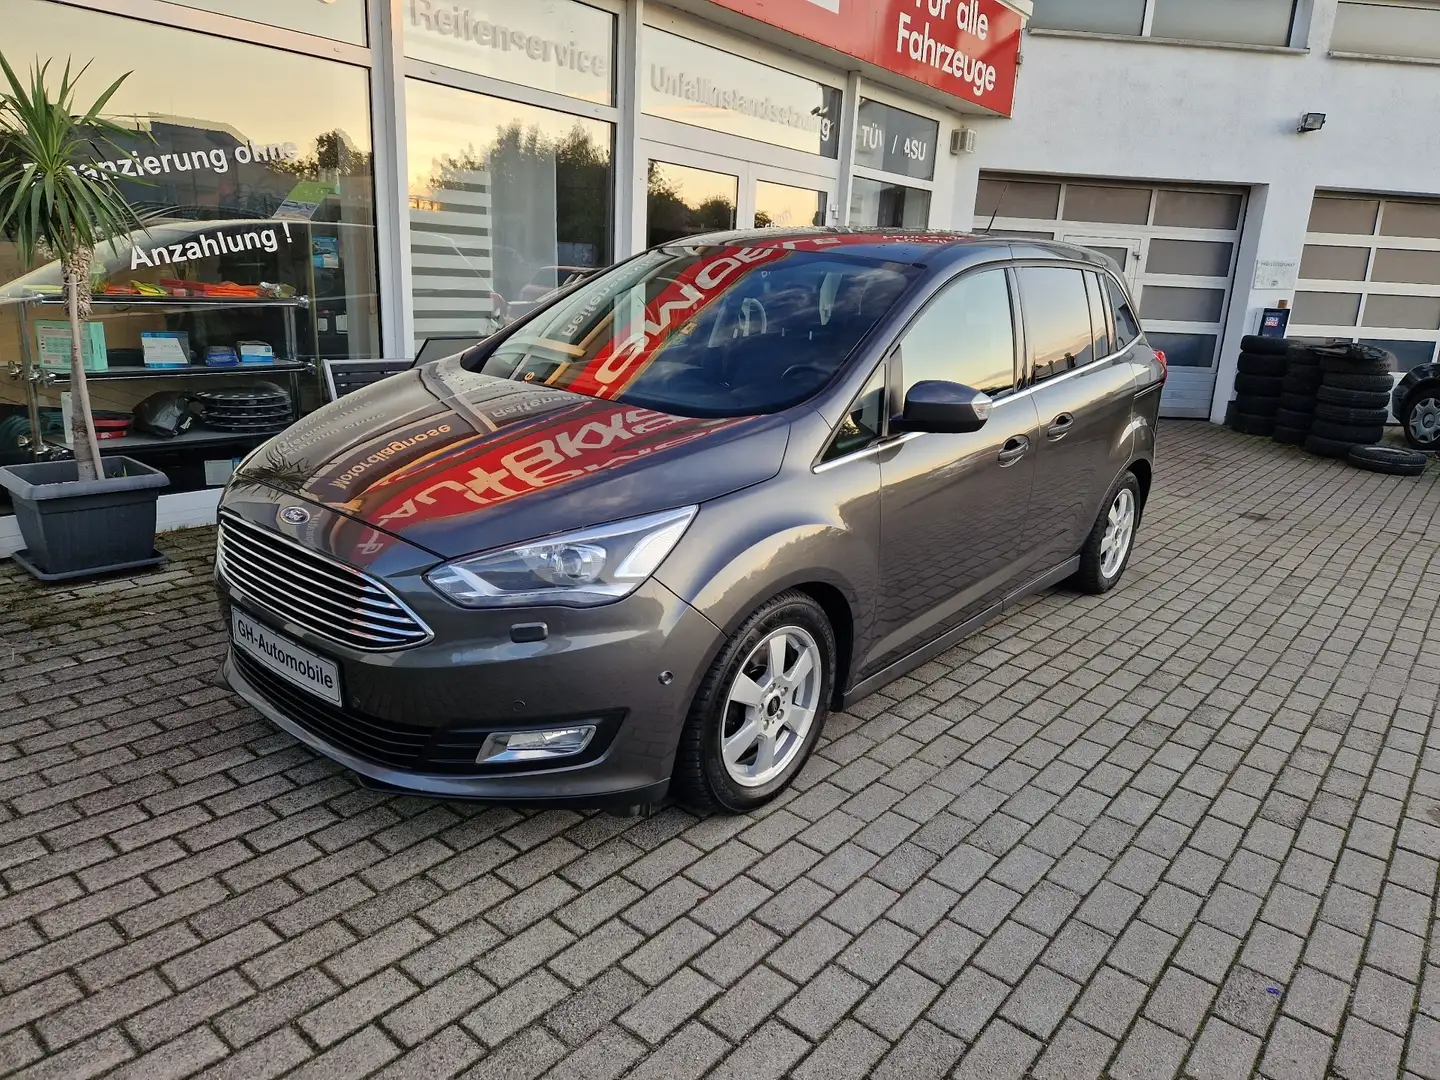 Ford Grand C-Max EcoBo+Start-Stop+AHK+Navi+LED+2xPDC+beh. Frontsch- smeđa - 1